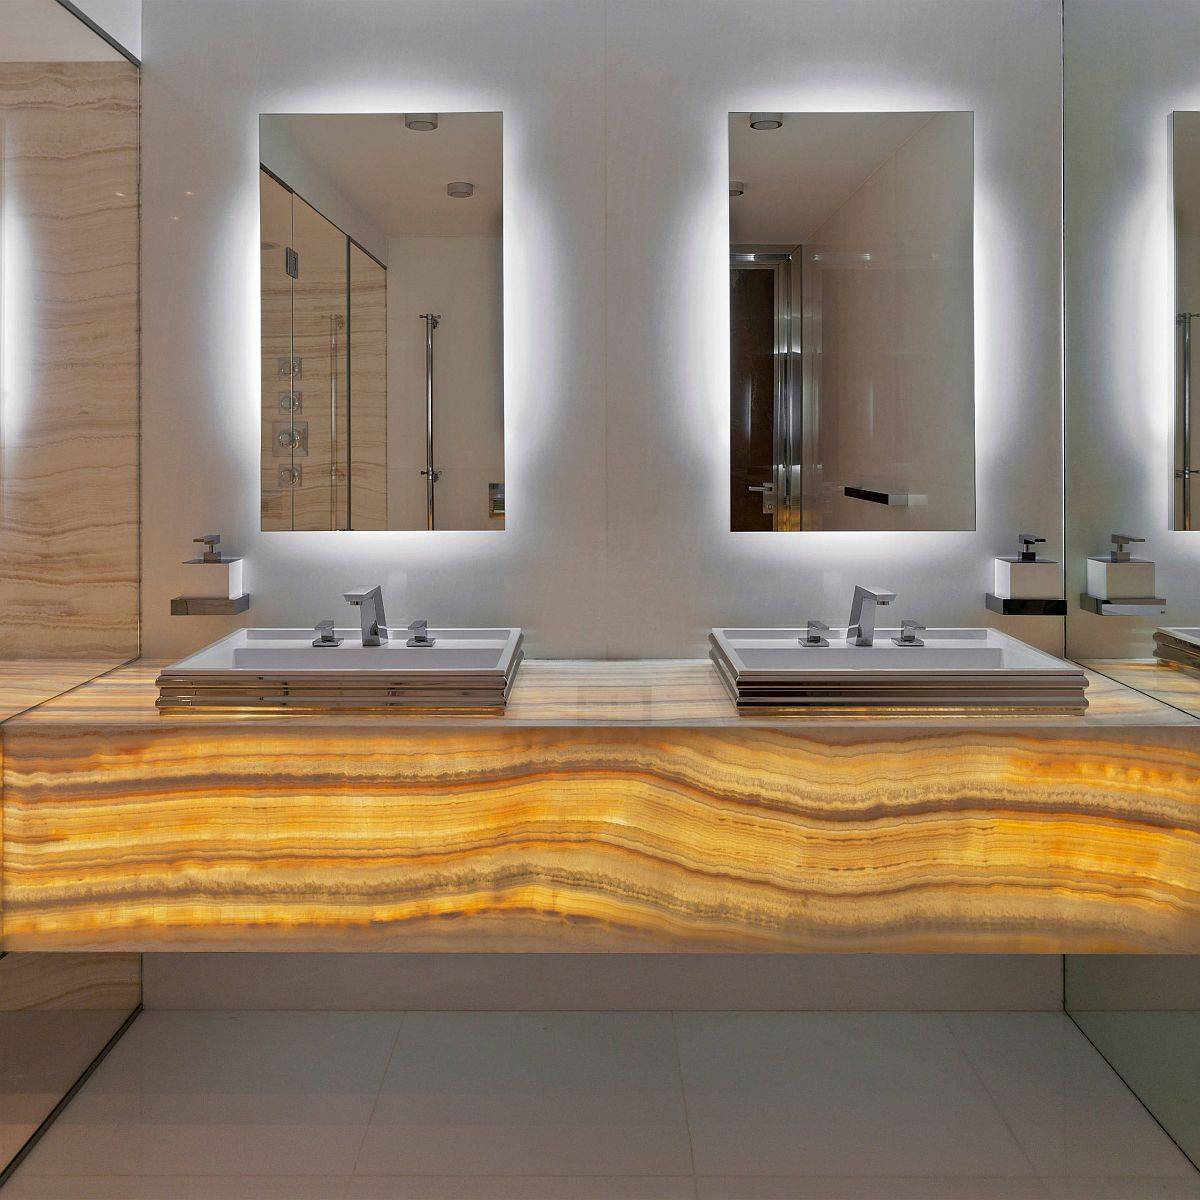 Luxurious bathroom with back-lit onyx countertops and mirrors